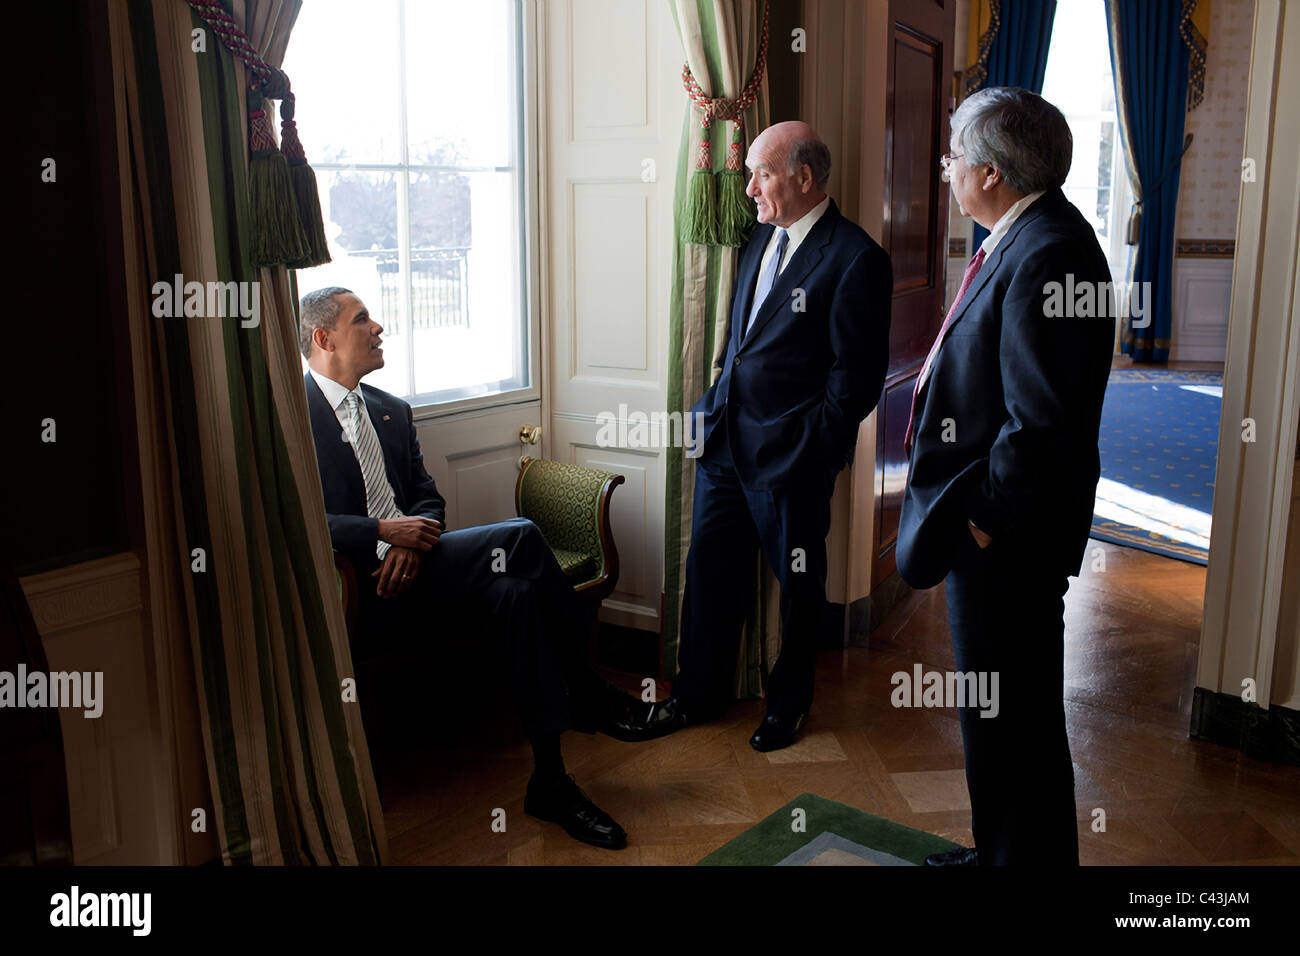 President Barack Obama waits in the Green Room of the White House with interim Chief of Staff Pete Rouse, right, and Bill Daley Stock Photo